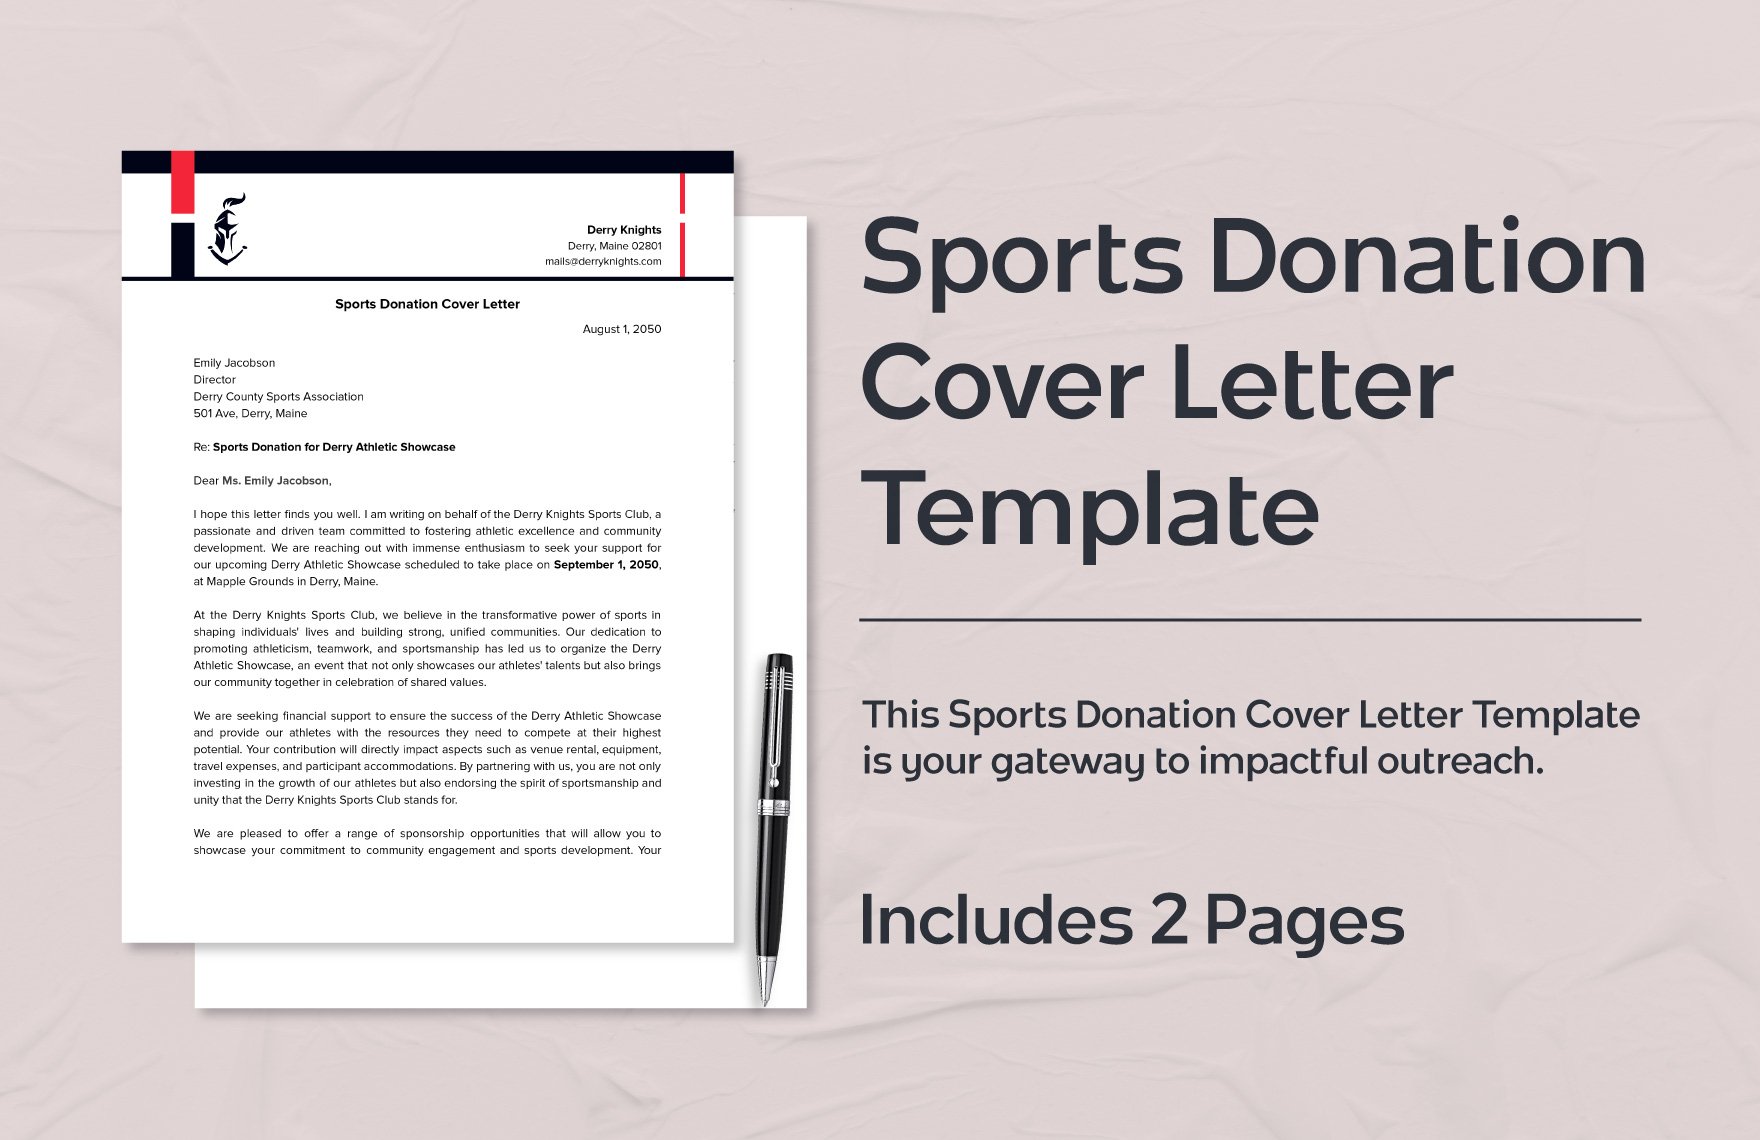 Sports Donation Cover Letter Template